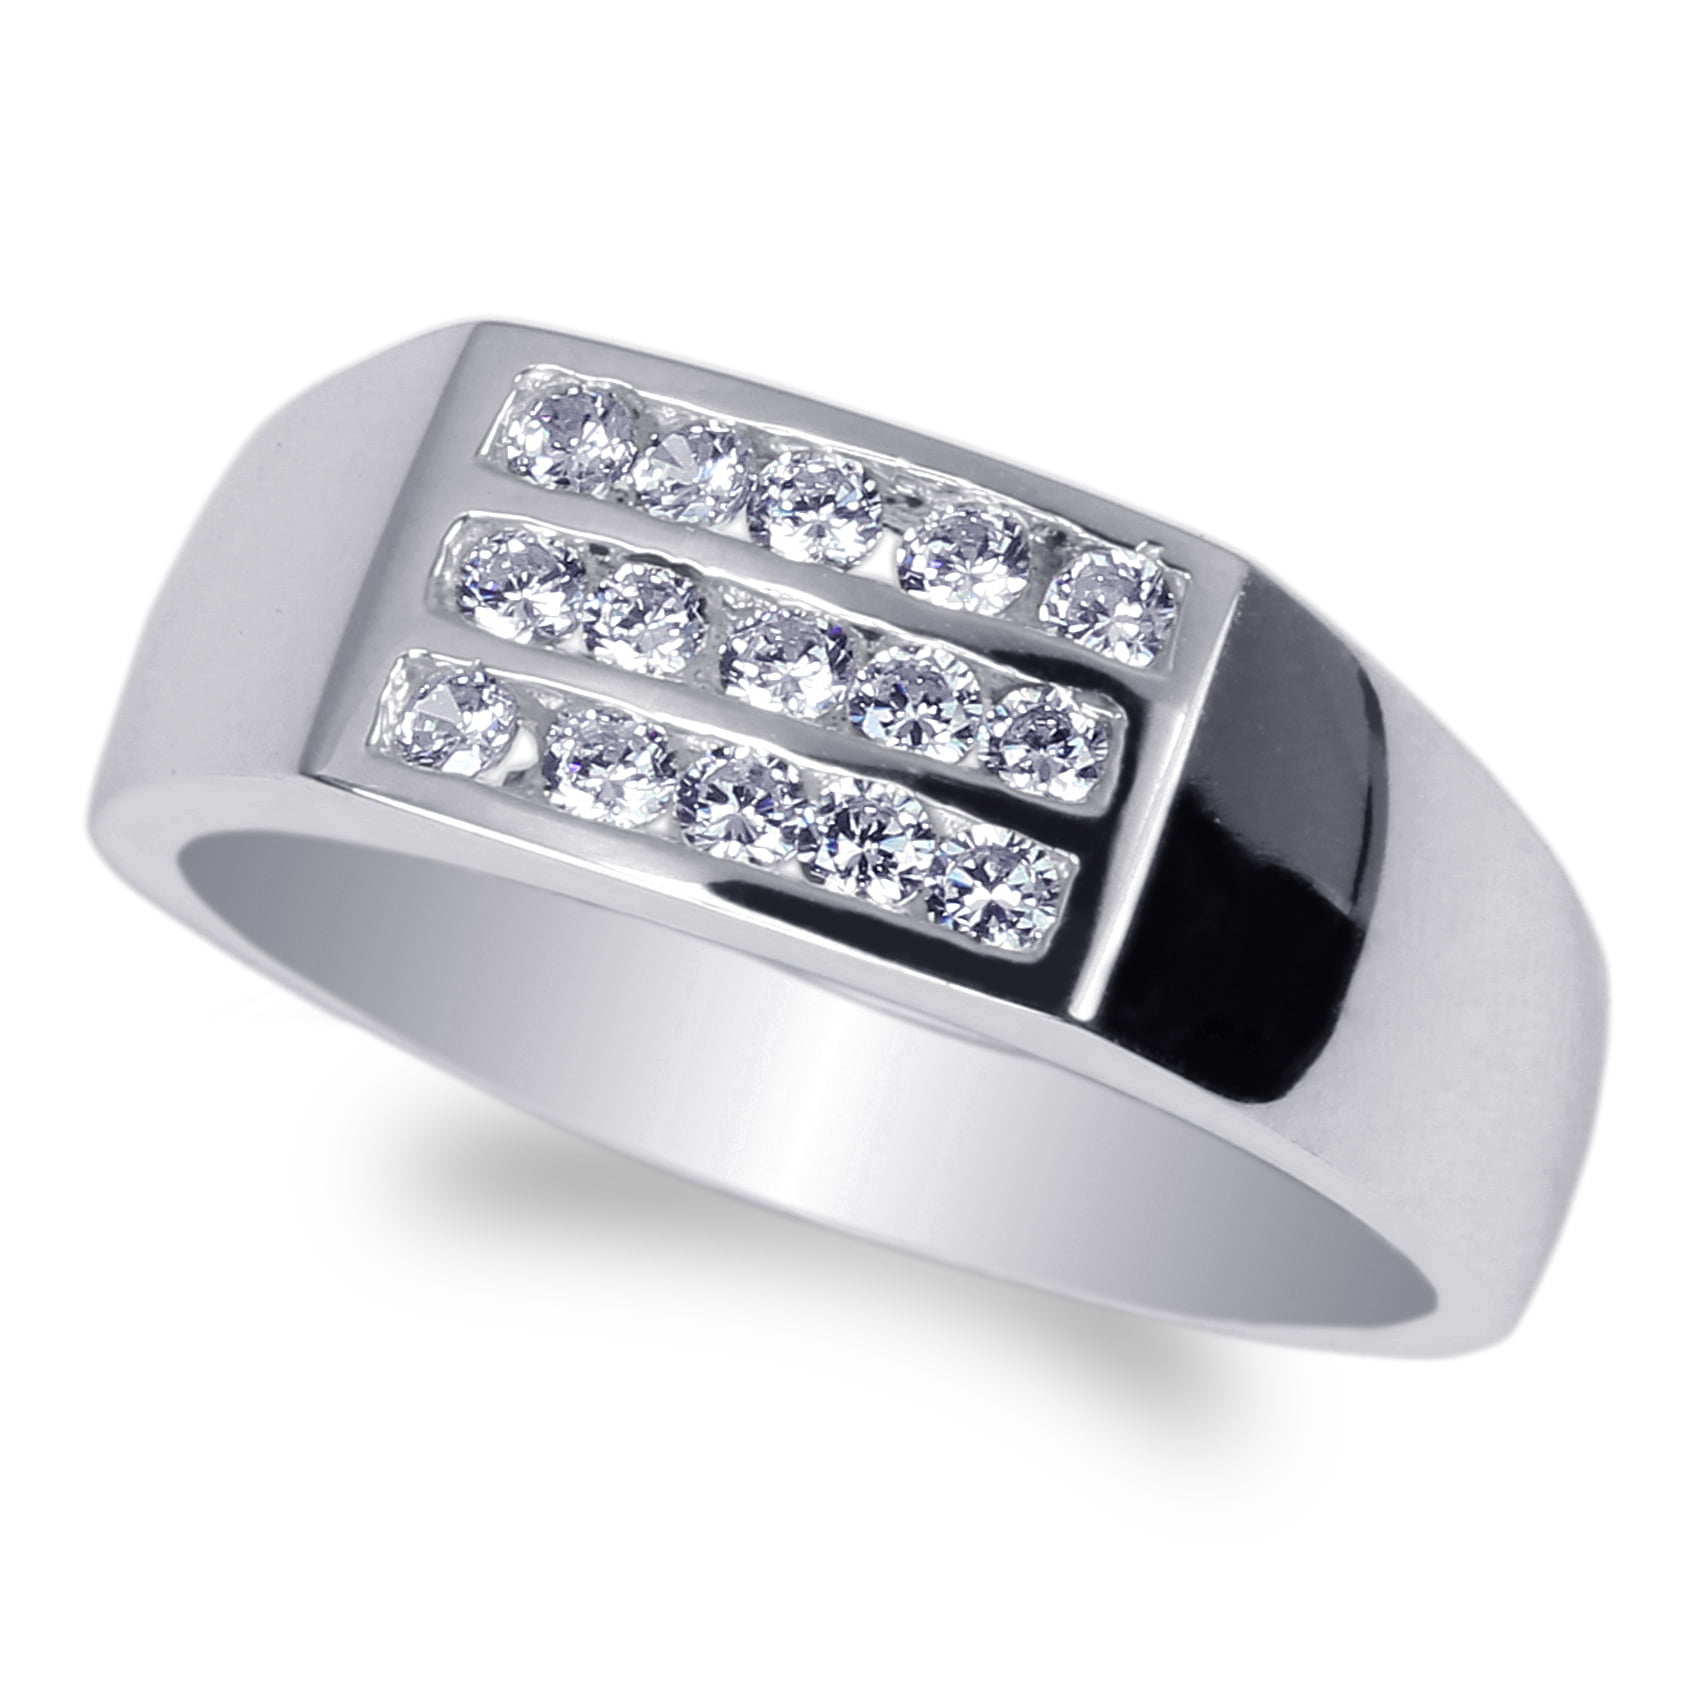 Men's 1ct Pave Cz Fashion Engagement .925 Sterling Silver Ring Sizes 8-12 